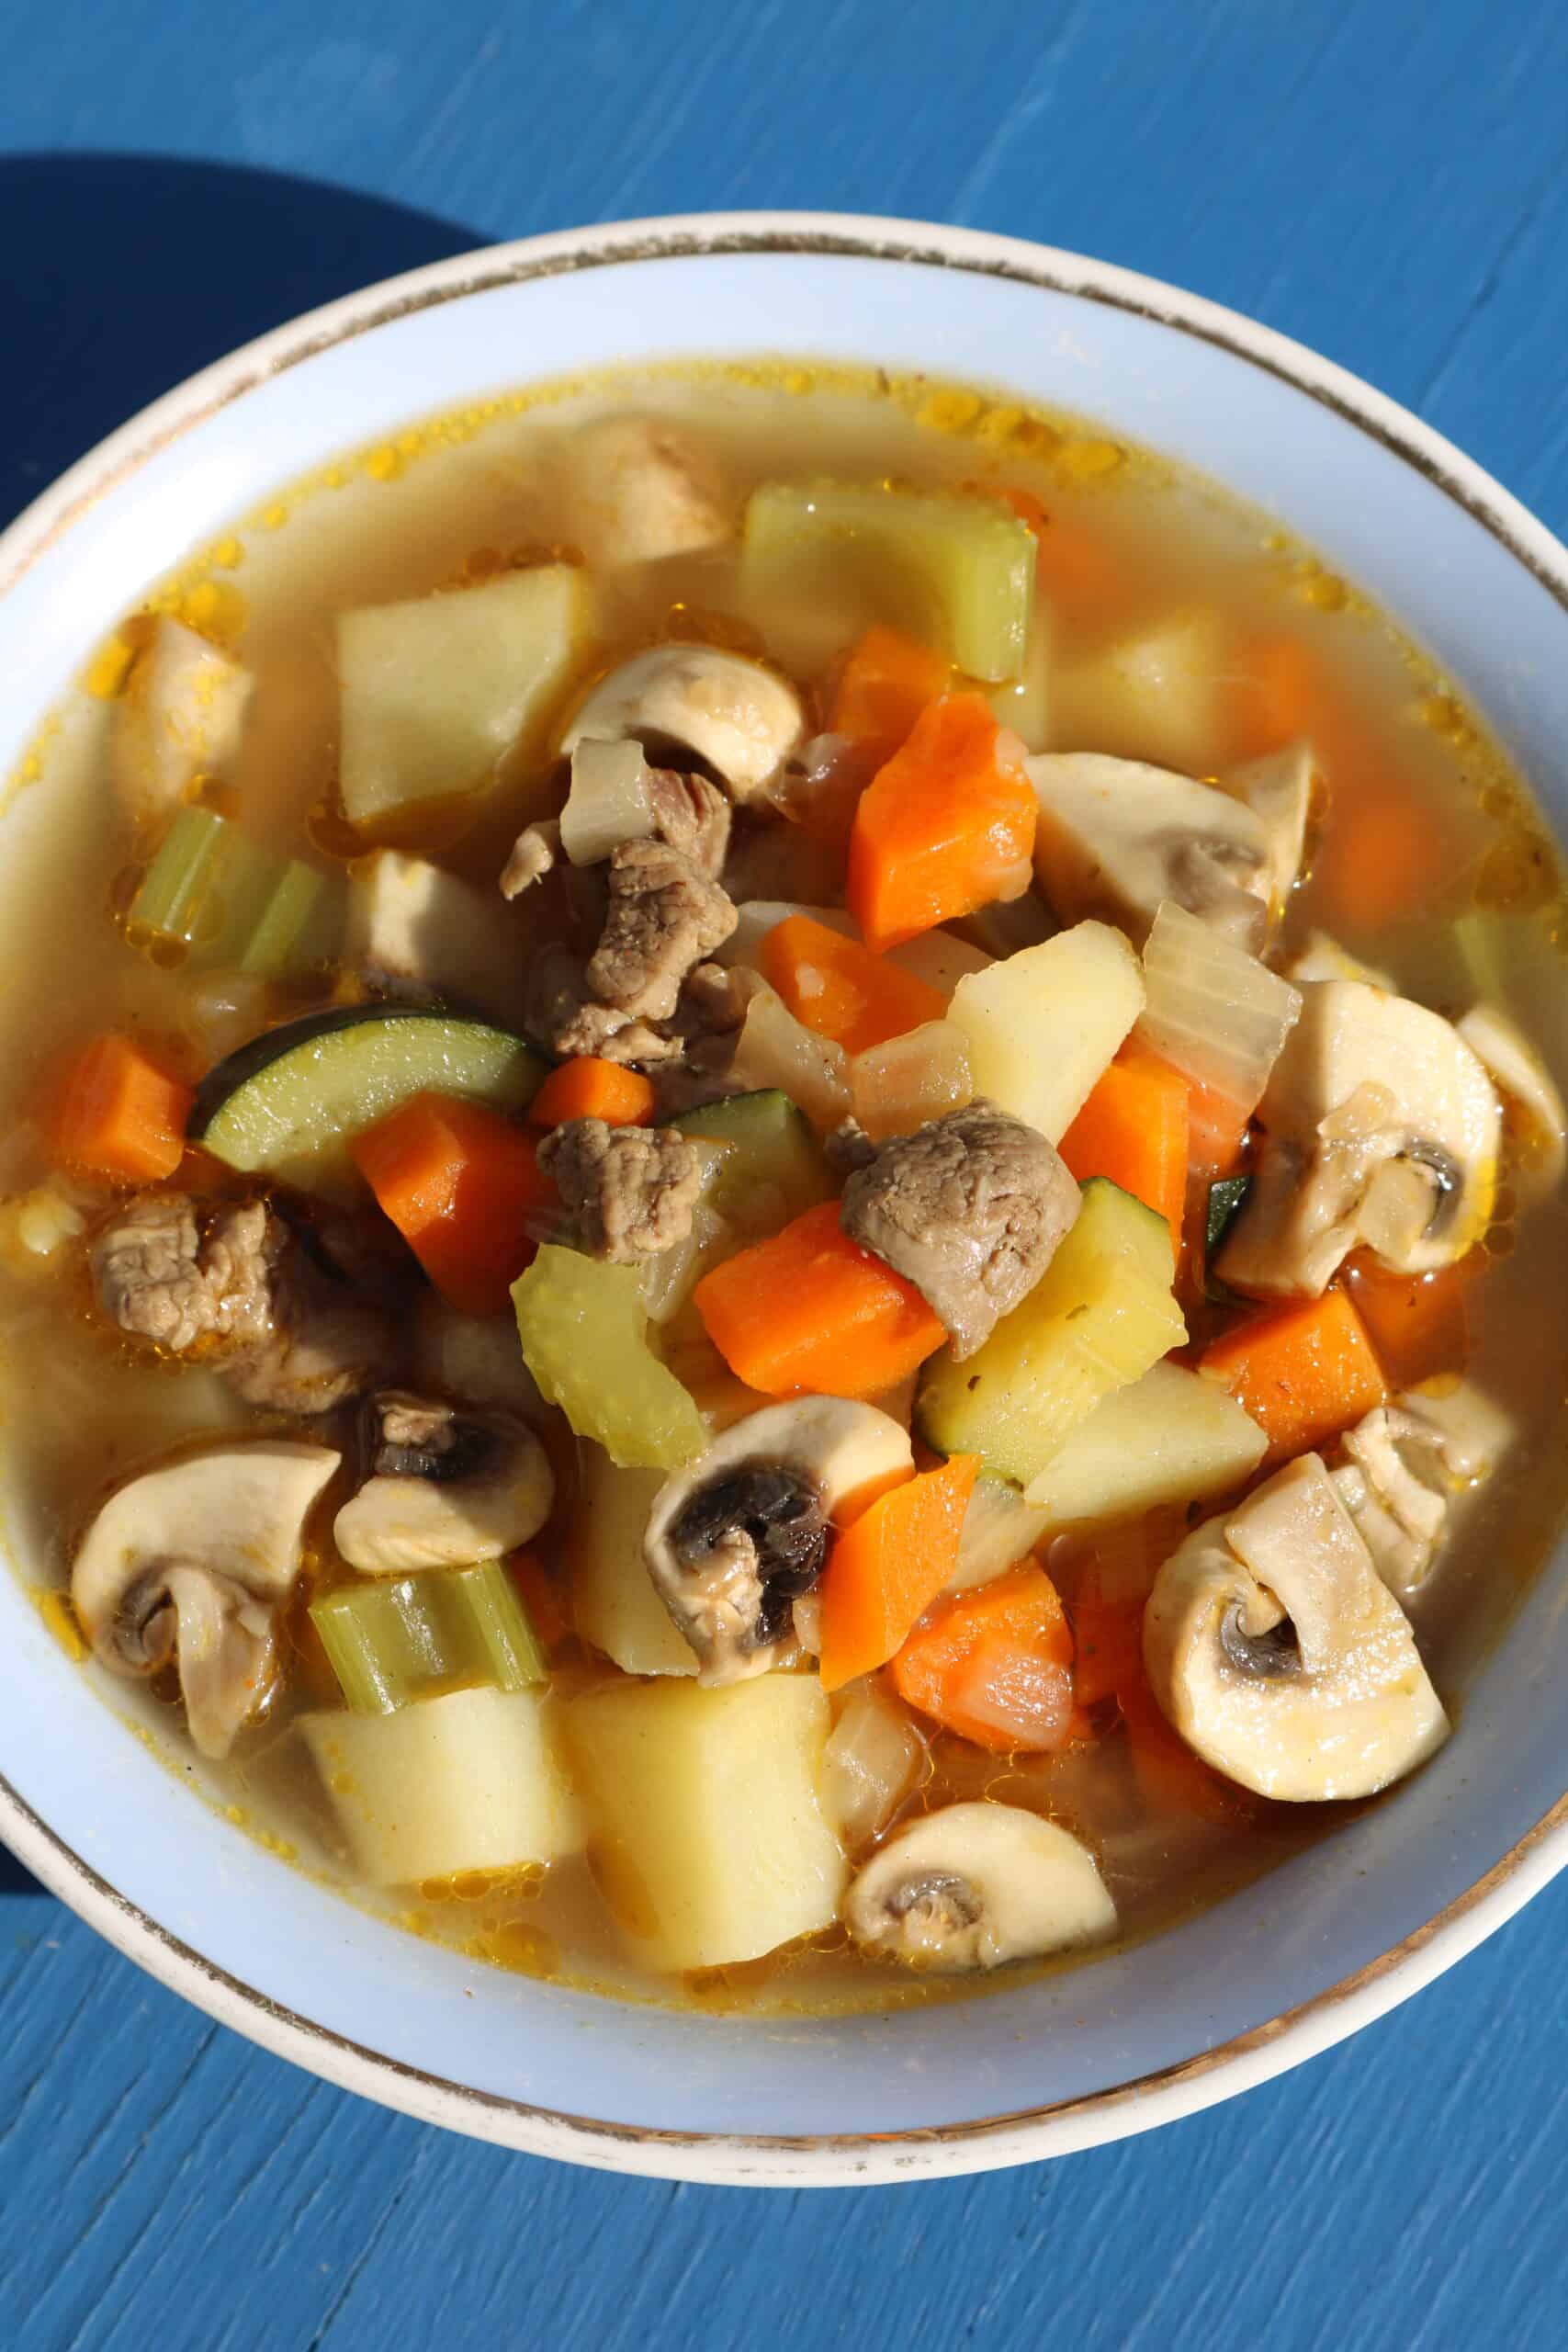 lamb and vegetable soup